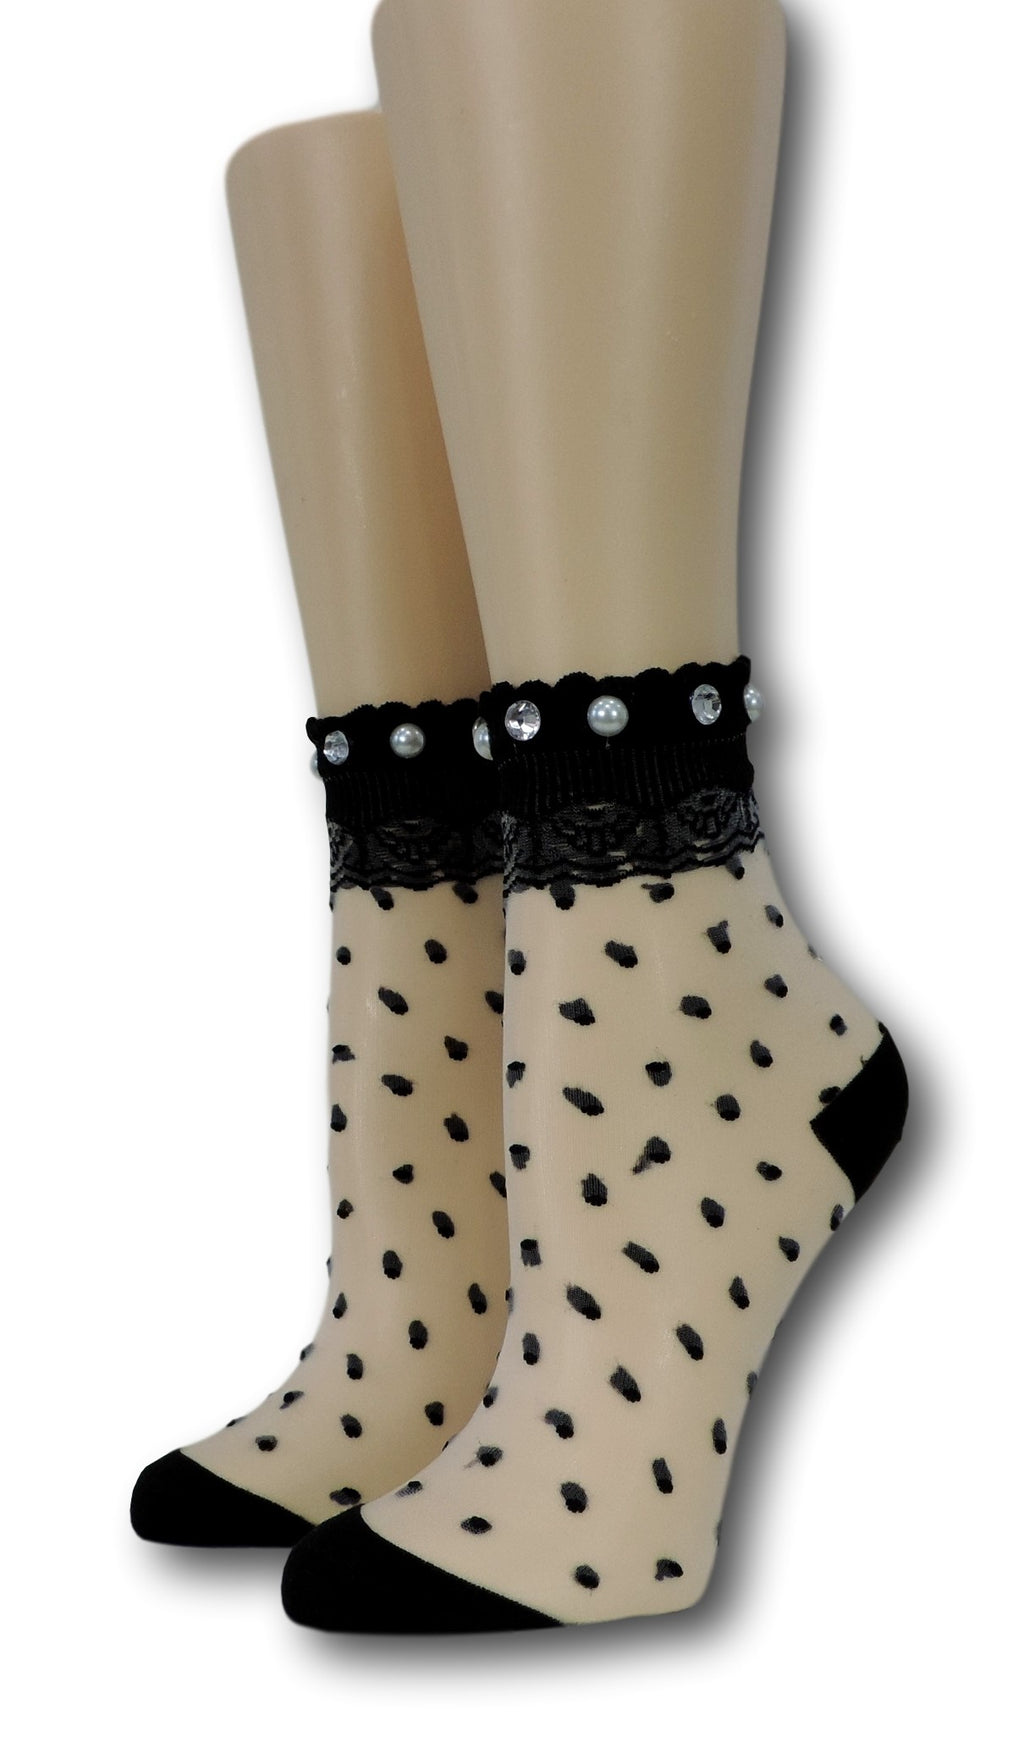 Black Royal Dotted Sheer Socks with beads